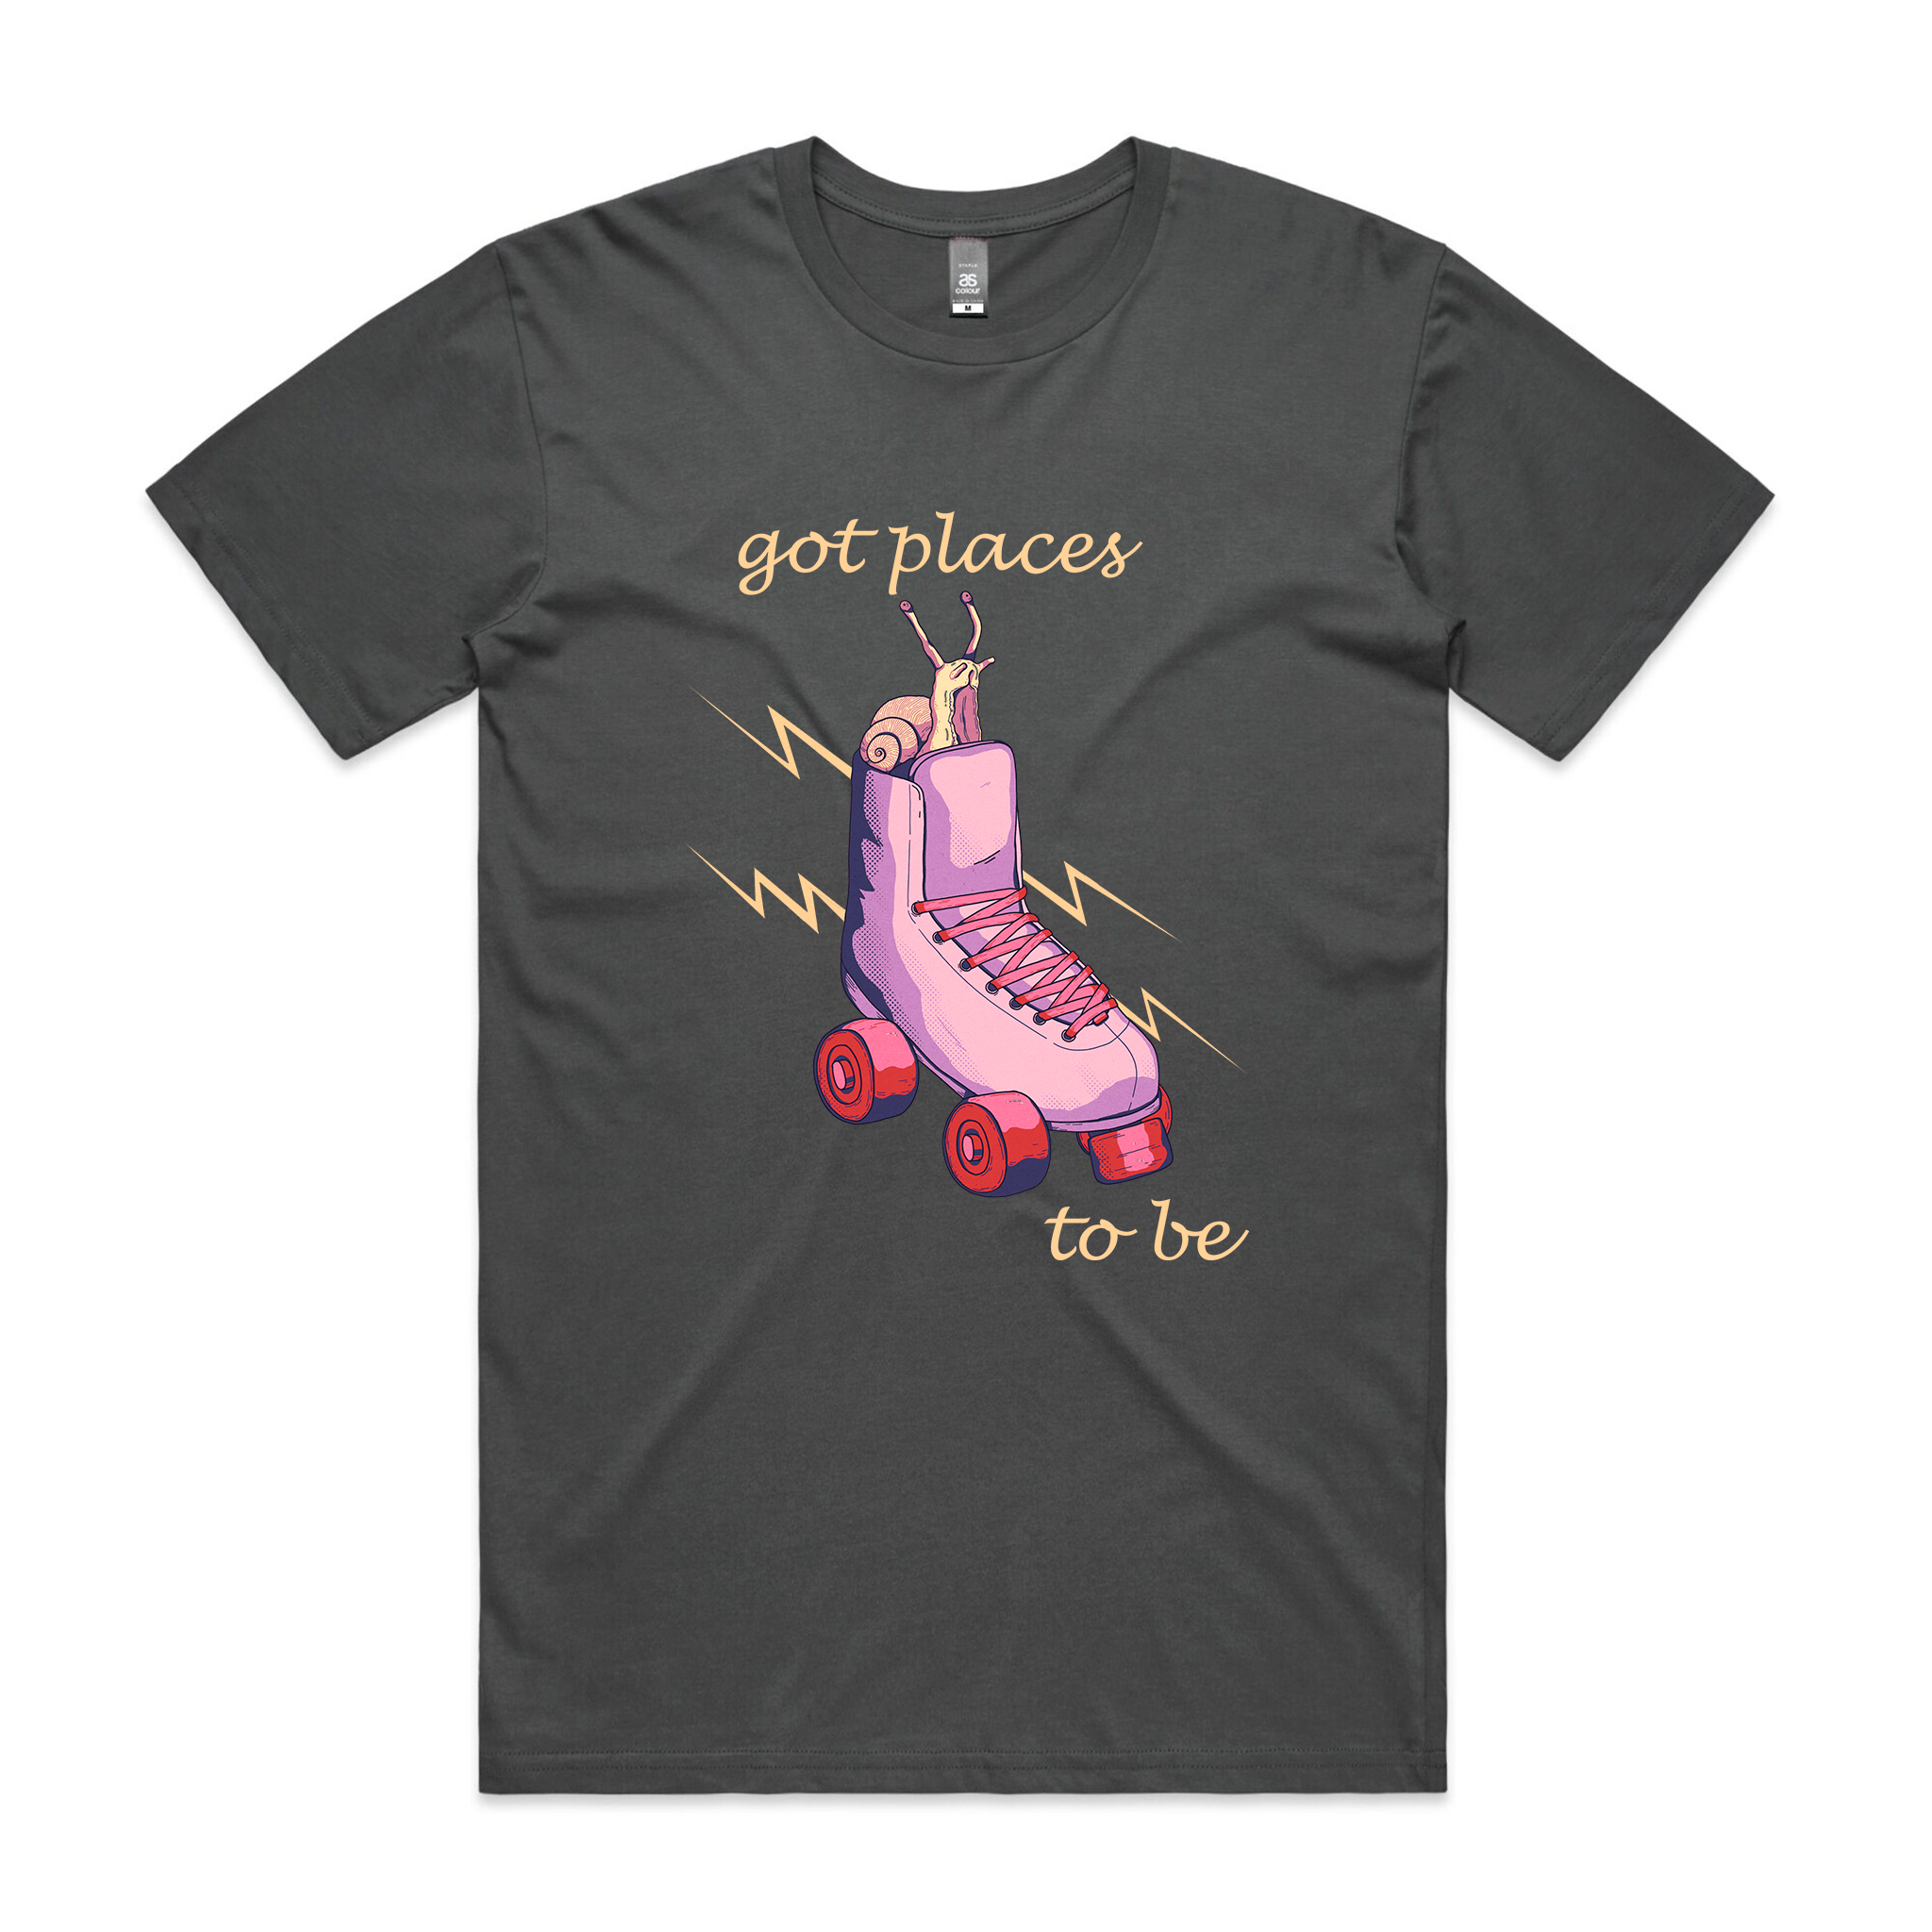 Places To Be Tee